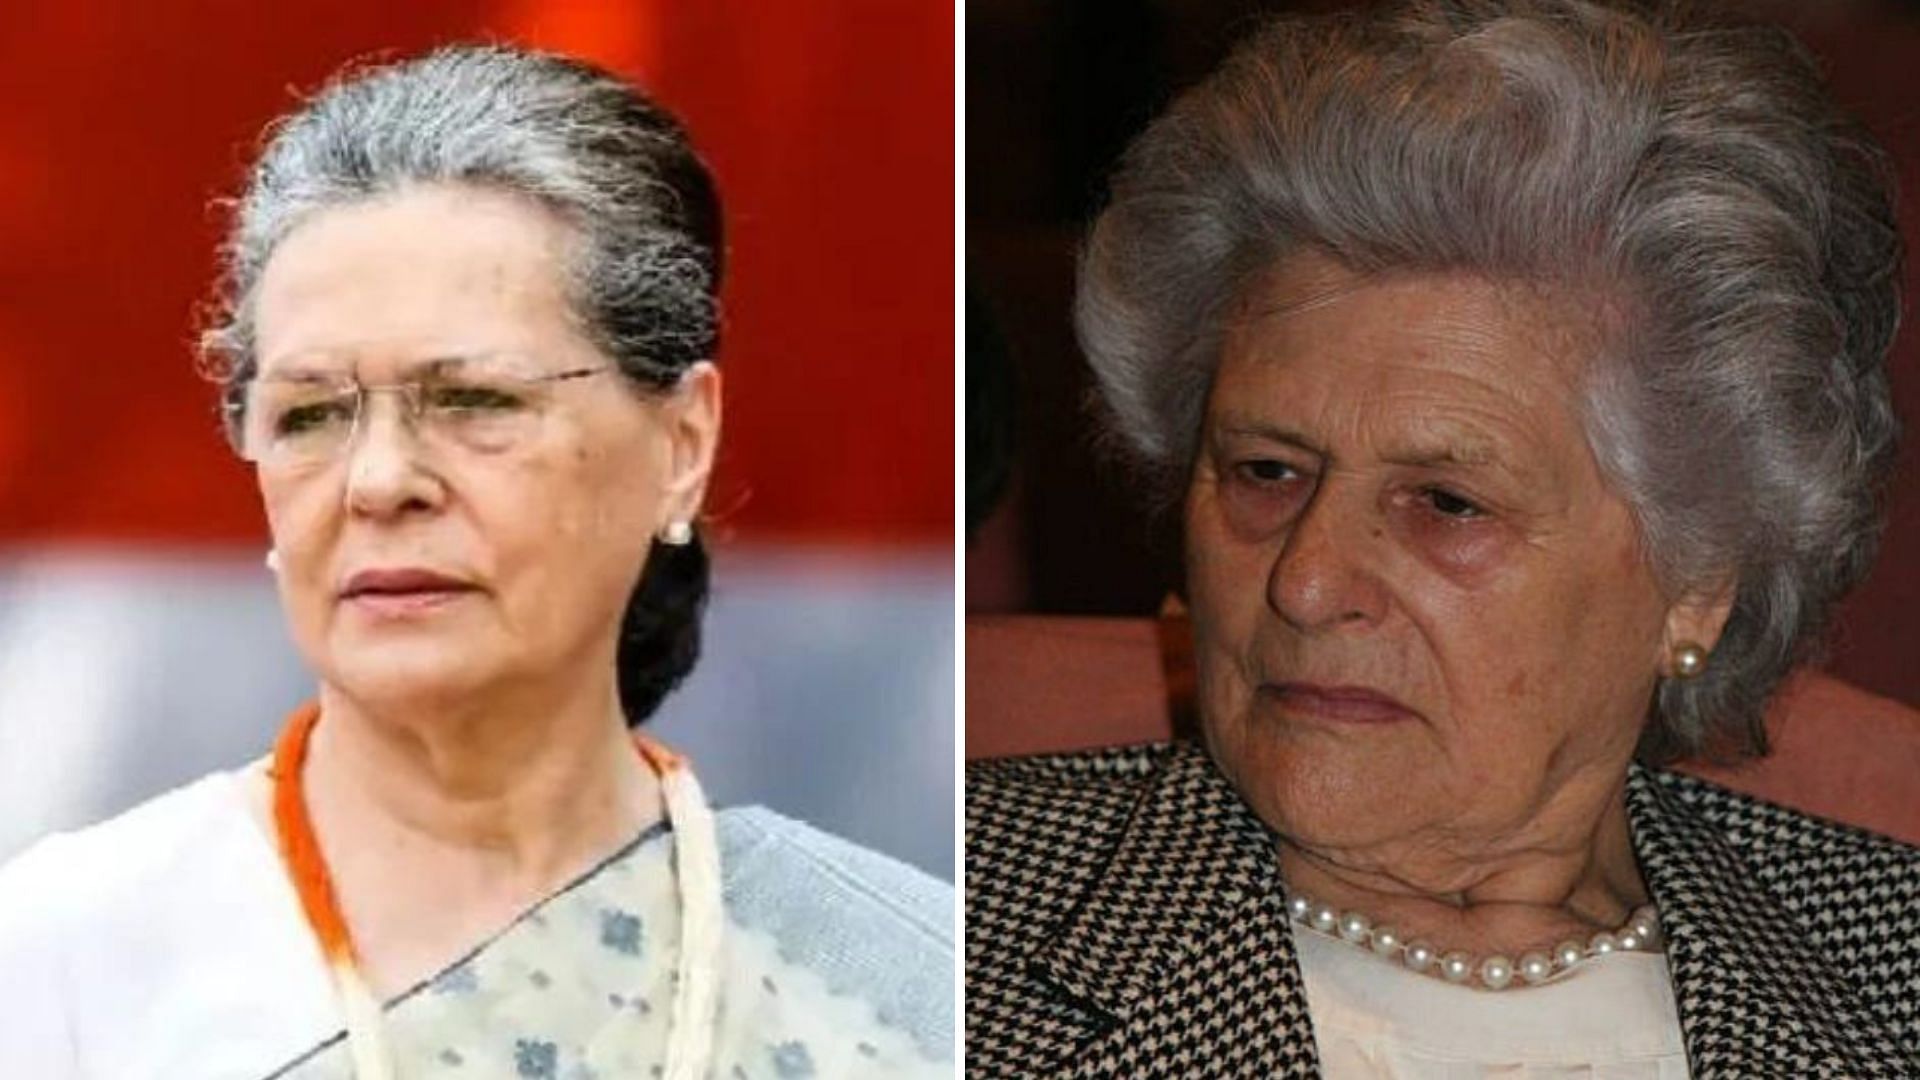 <div class="paragraphs"><p>Paola Maino, mother of interim <a href="https://www.thequint.com/topic/congress-party">Congress</a> President <a href="https://www.thequint.com/topic/sonia-gandhi">Sonia Gandhi</a>, passed away at her home in Italy, the party's General Secretary in-charge Communications Jairam Ramesh announced on Wednesday, 31 August.</p></div>